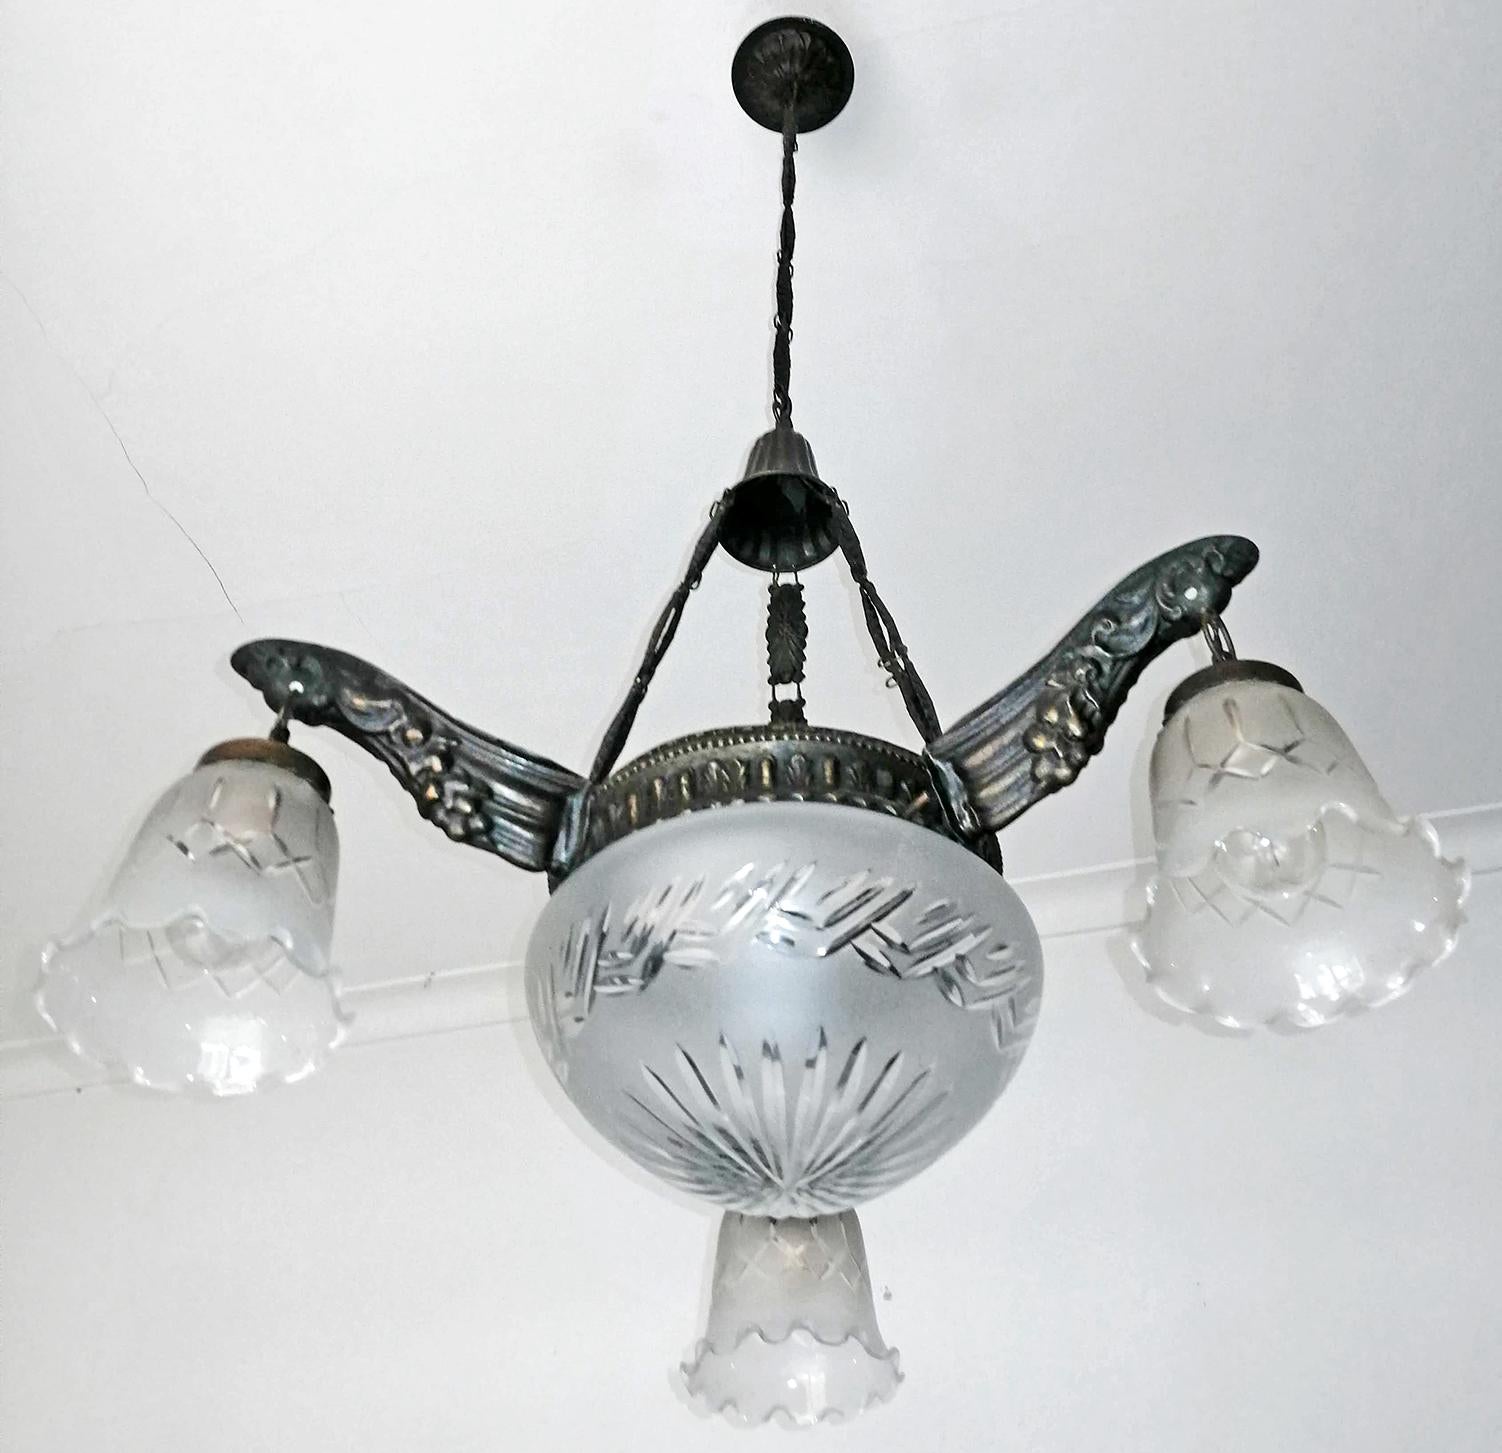 French Degué style Art Deco white frosted cut glass, 4-light chandelier
4-light bulbs E27
Good working condition
Measures:
Diameter 25.6 in / 65 cm
Height 41.3 in (chain 15.7 in)/ 105 cm (chain 40 cm)
Weight: 11 lb. (5 kg).
Assembly required. Bulbs